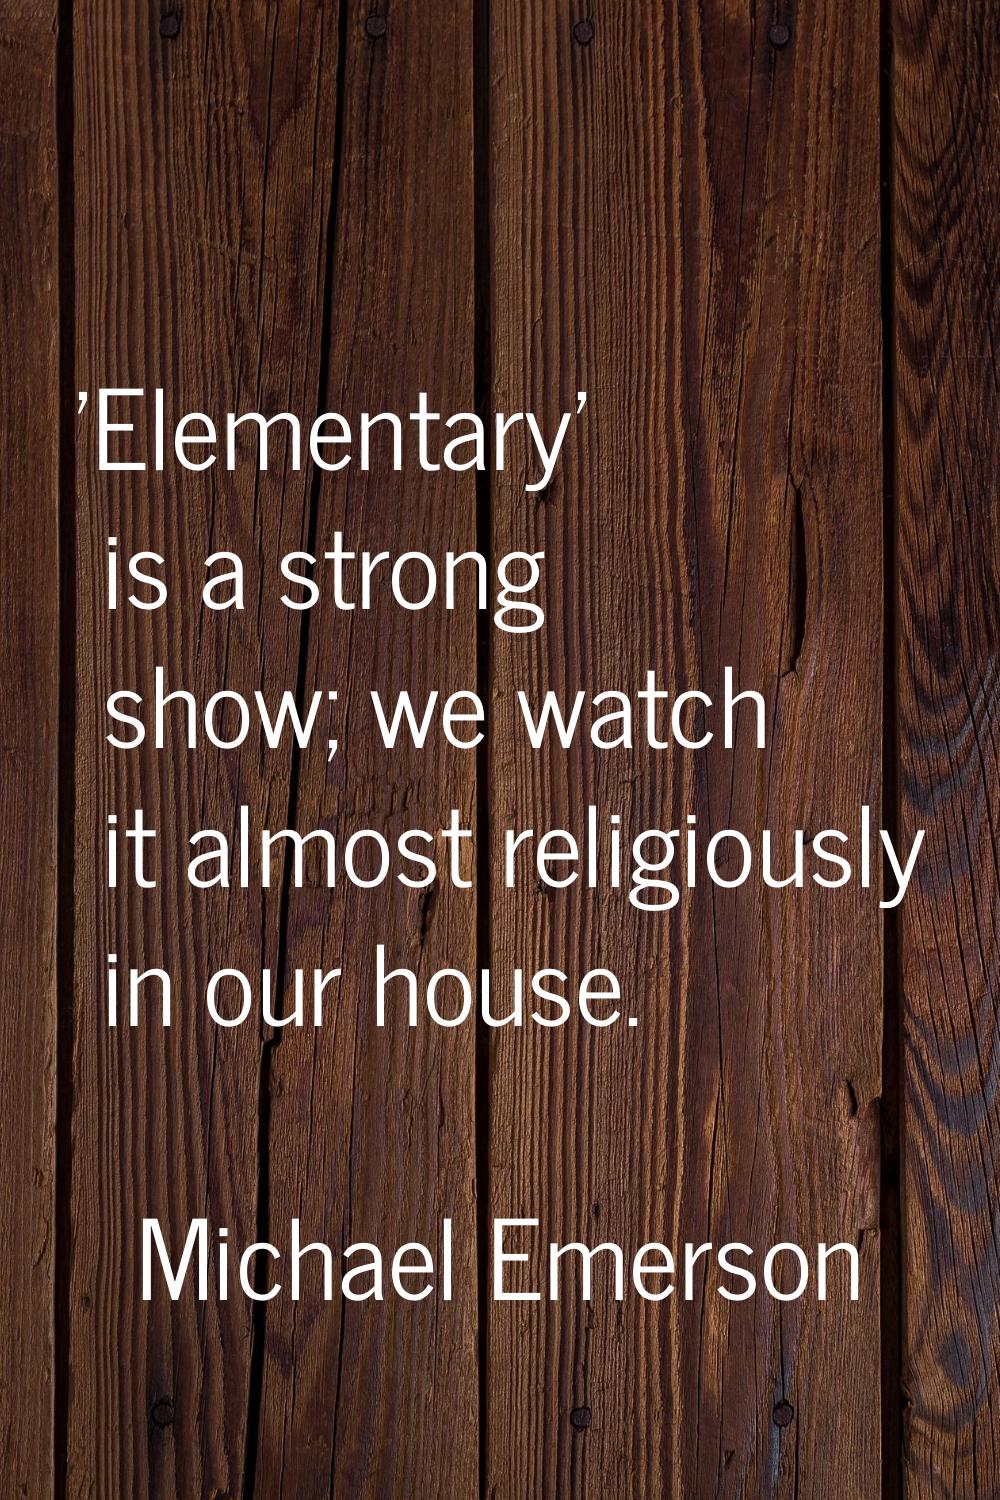 'Elementary' is a strong show; we watch it almost religiously in our house.